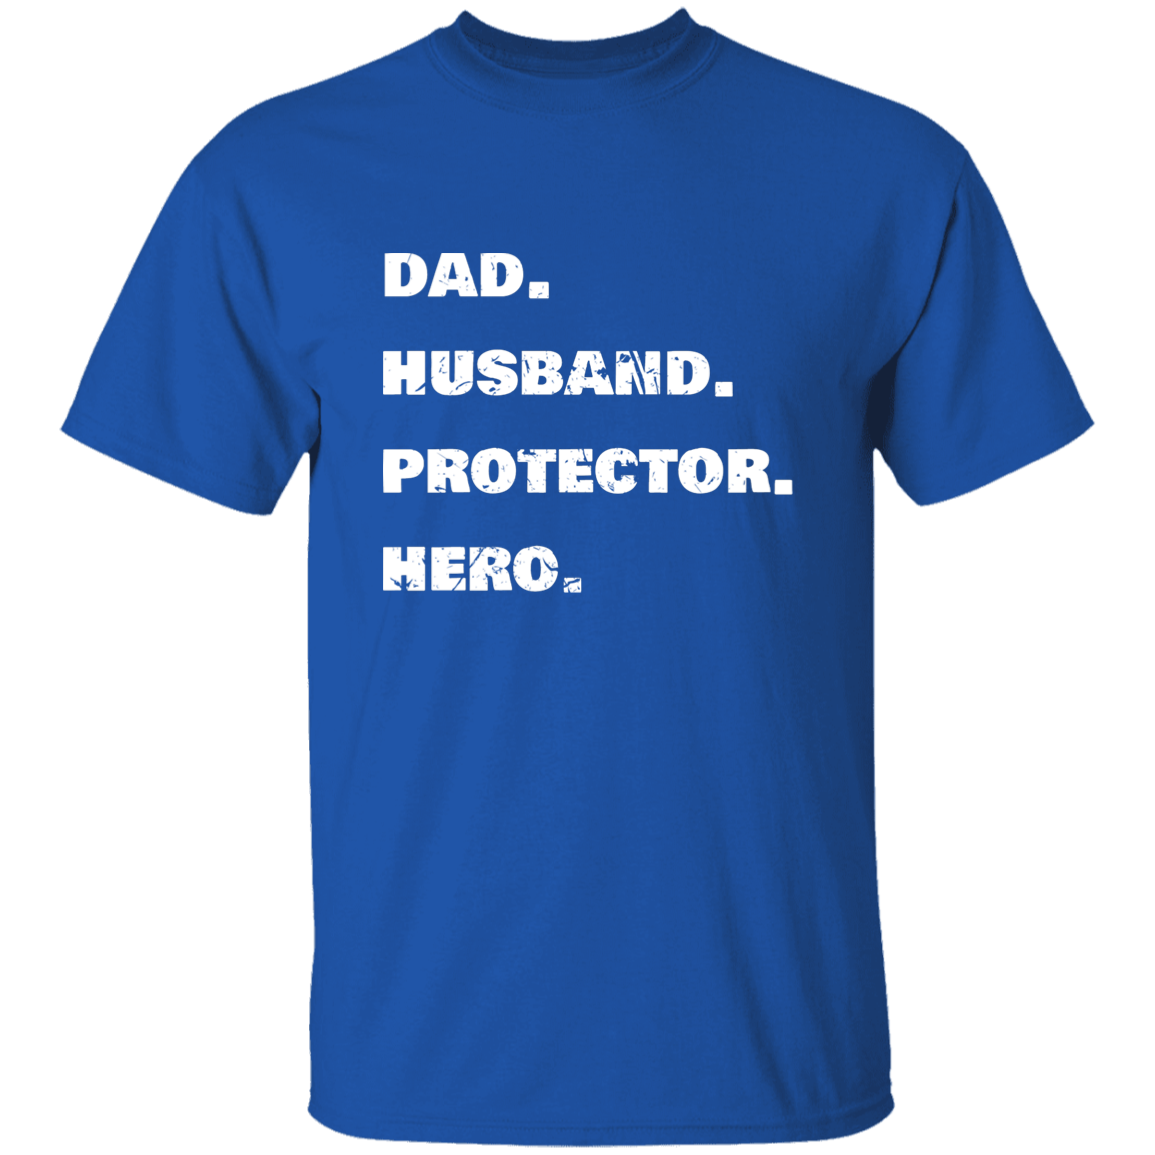 Dad. Husband. Protector. Hero. | Men's Premium T-Shirt | Perfect Gift for Dad and Husband